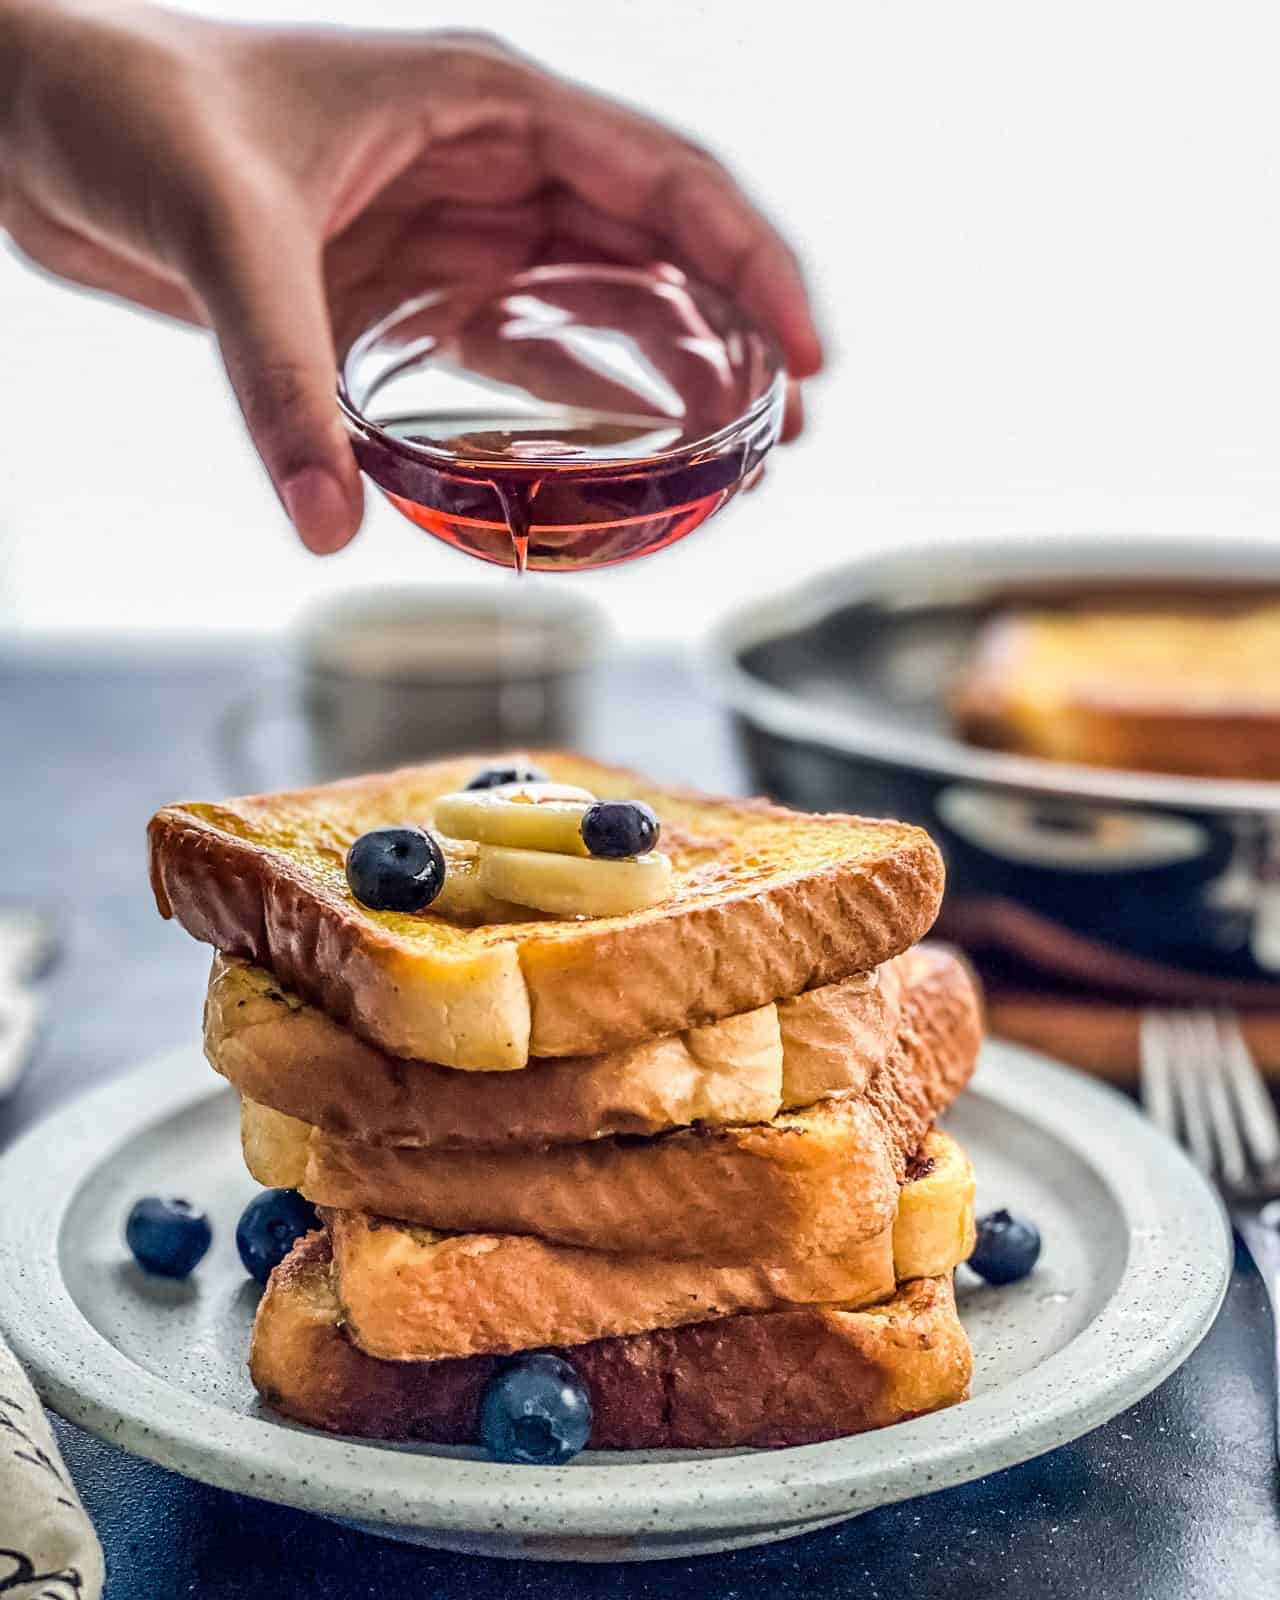 A fresh stack of french toast on a blue plate with a hand pouring syrup on top of the stack.